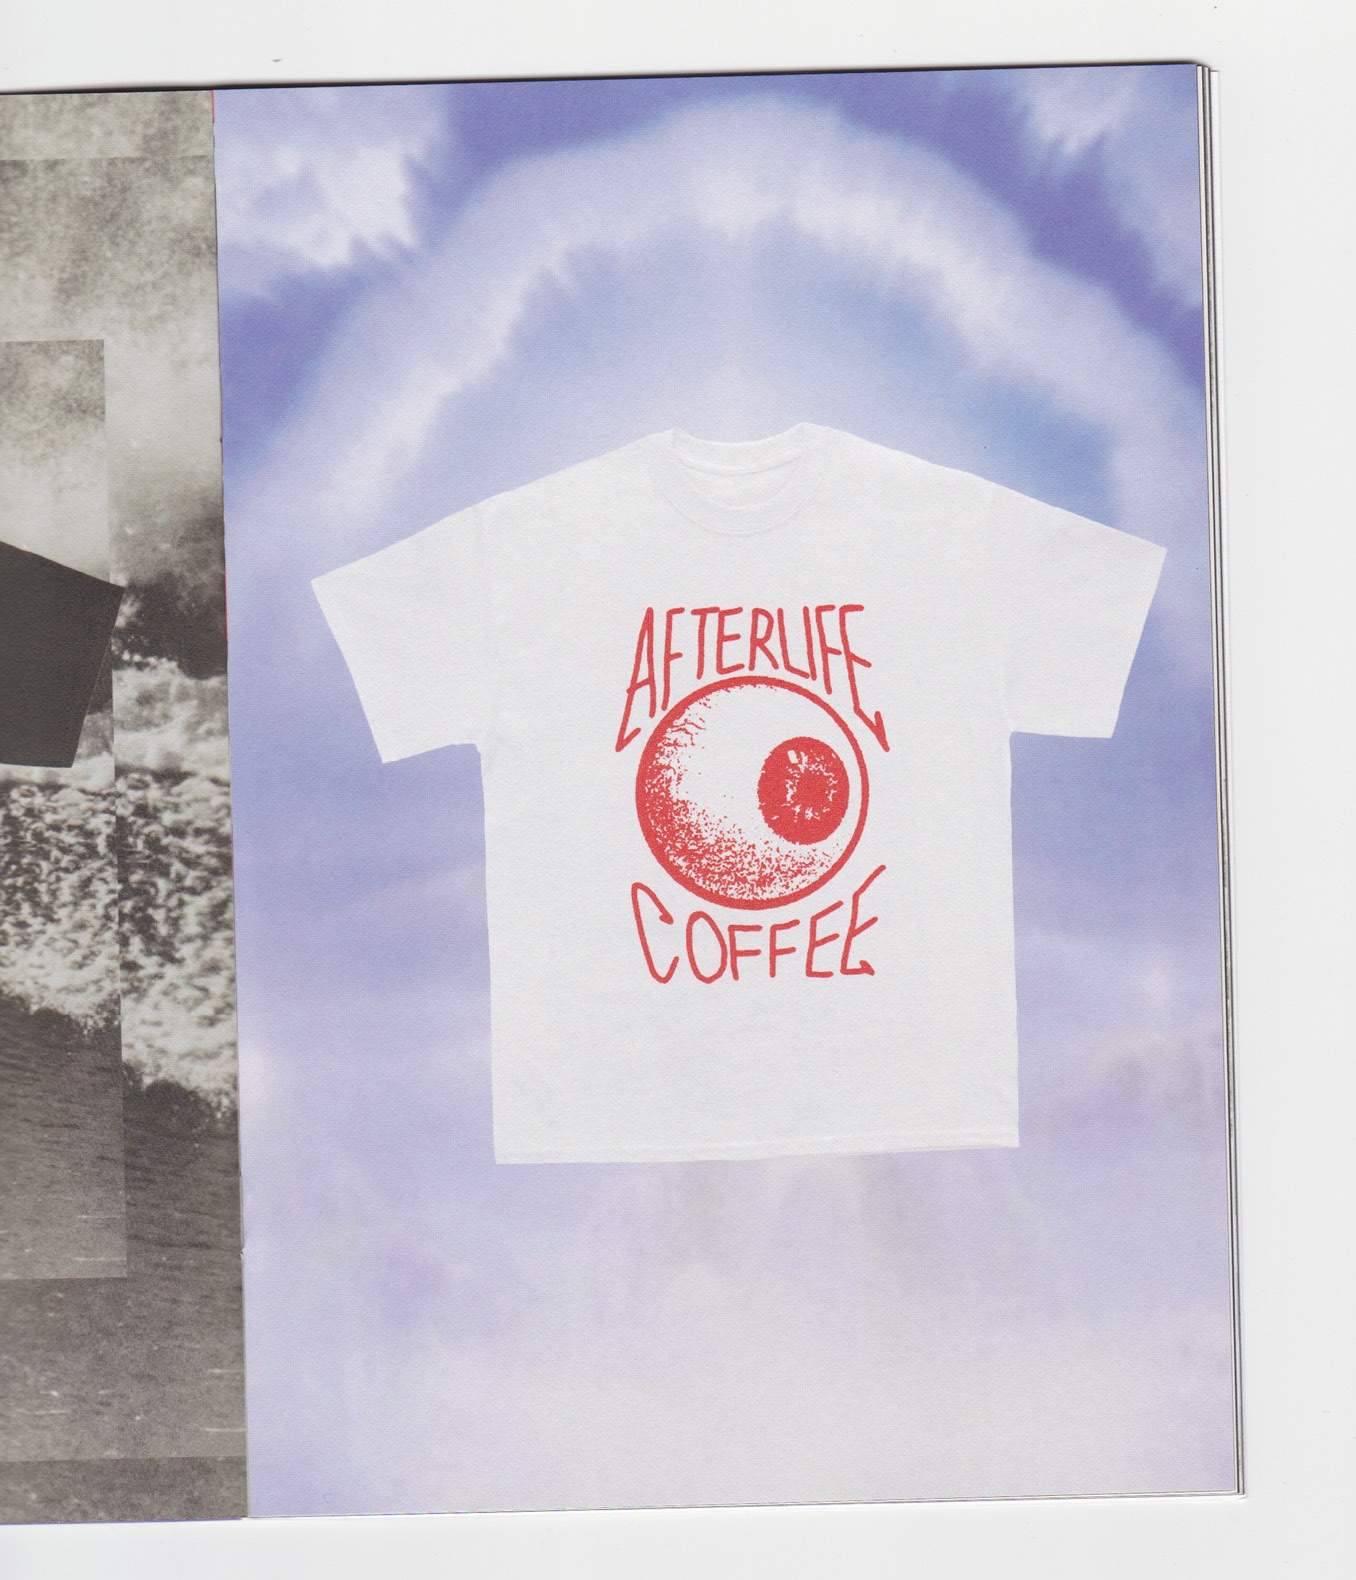 Afterlife - T-Shirt Graphic - Coffee Eye | Atollon - a design company